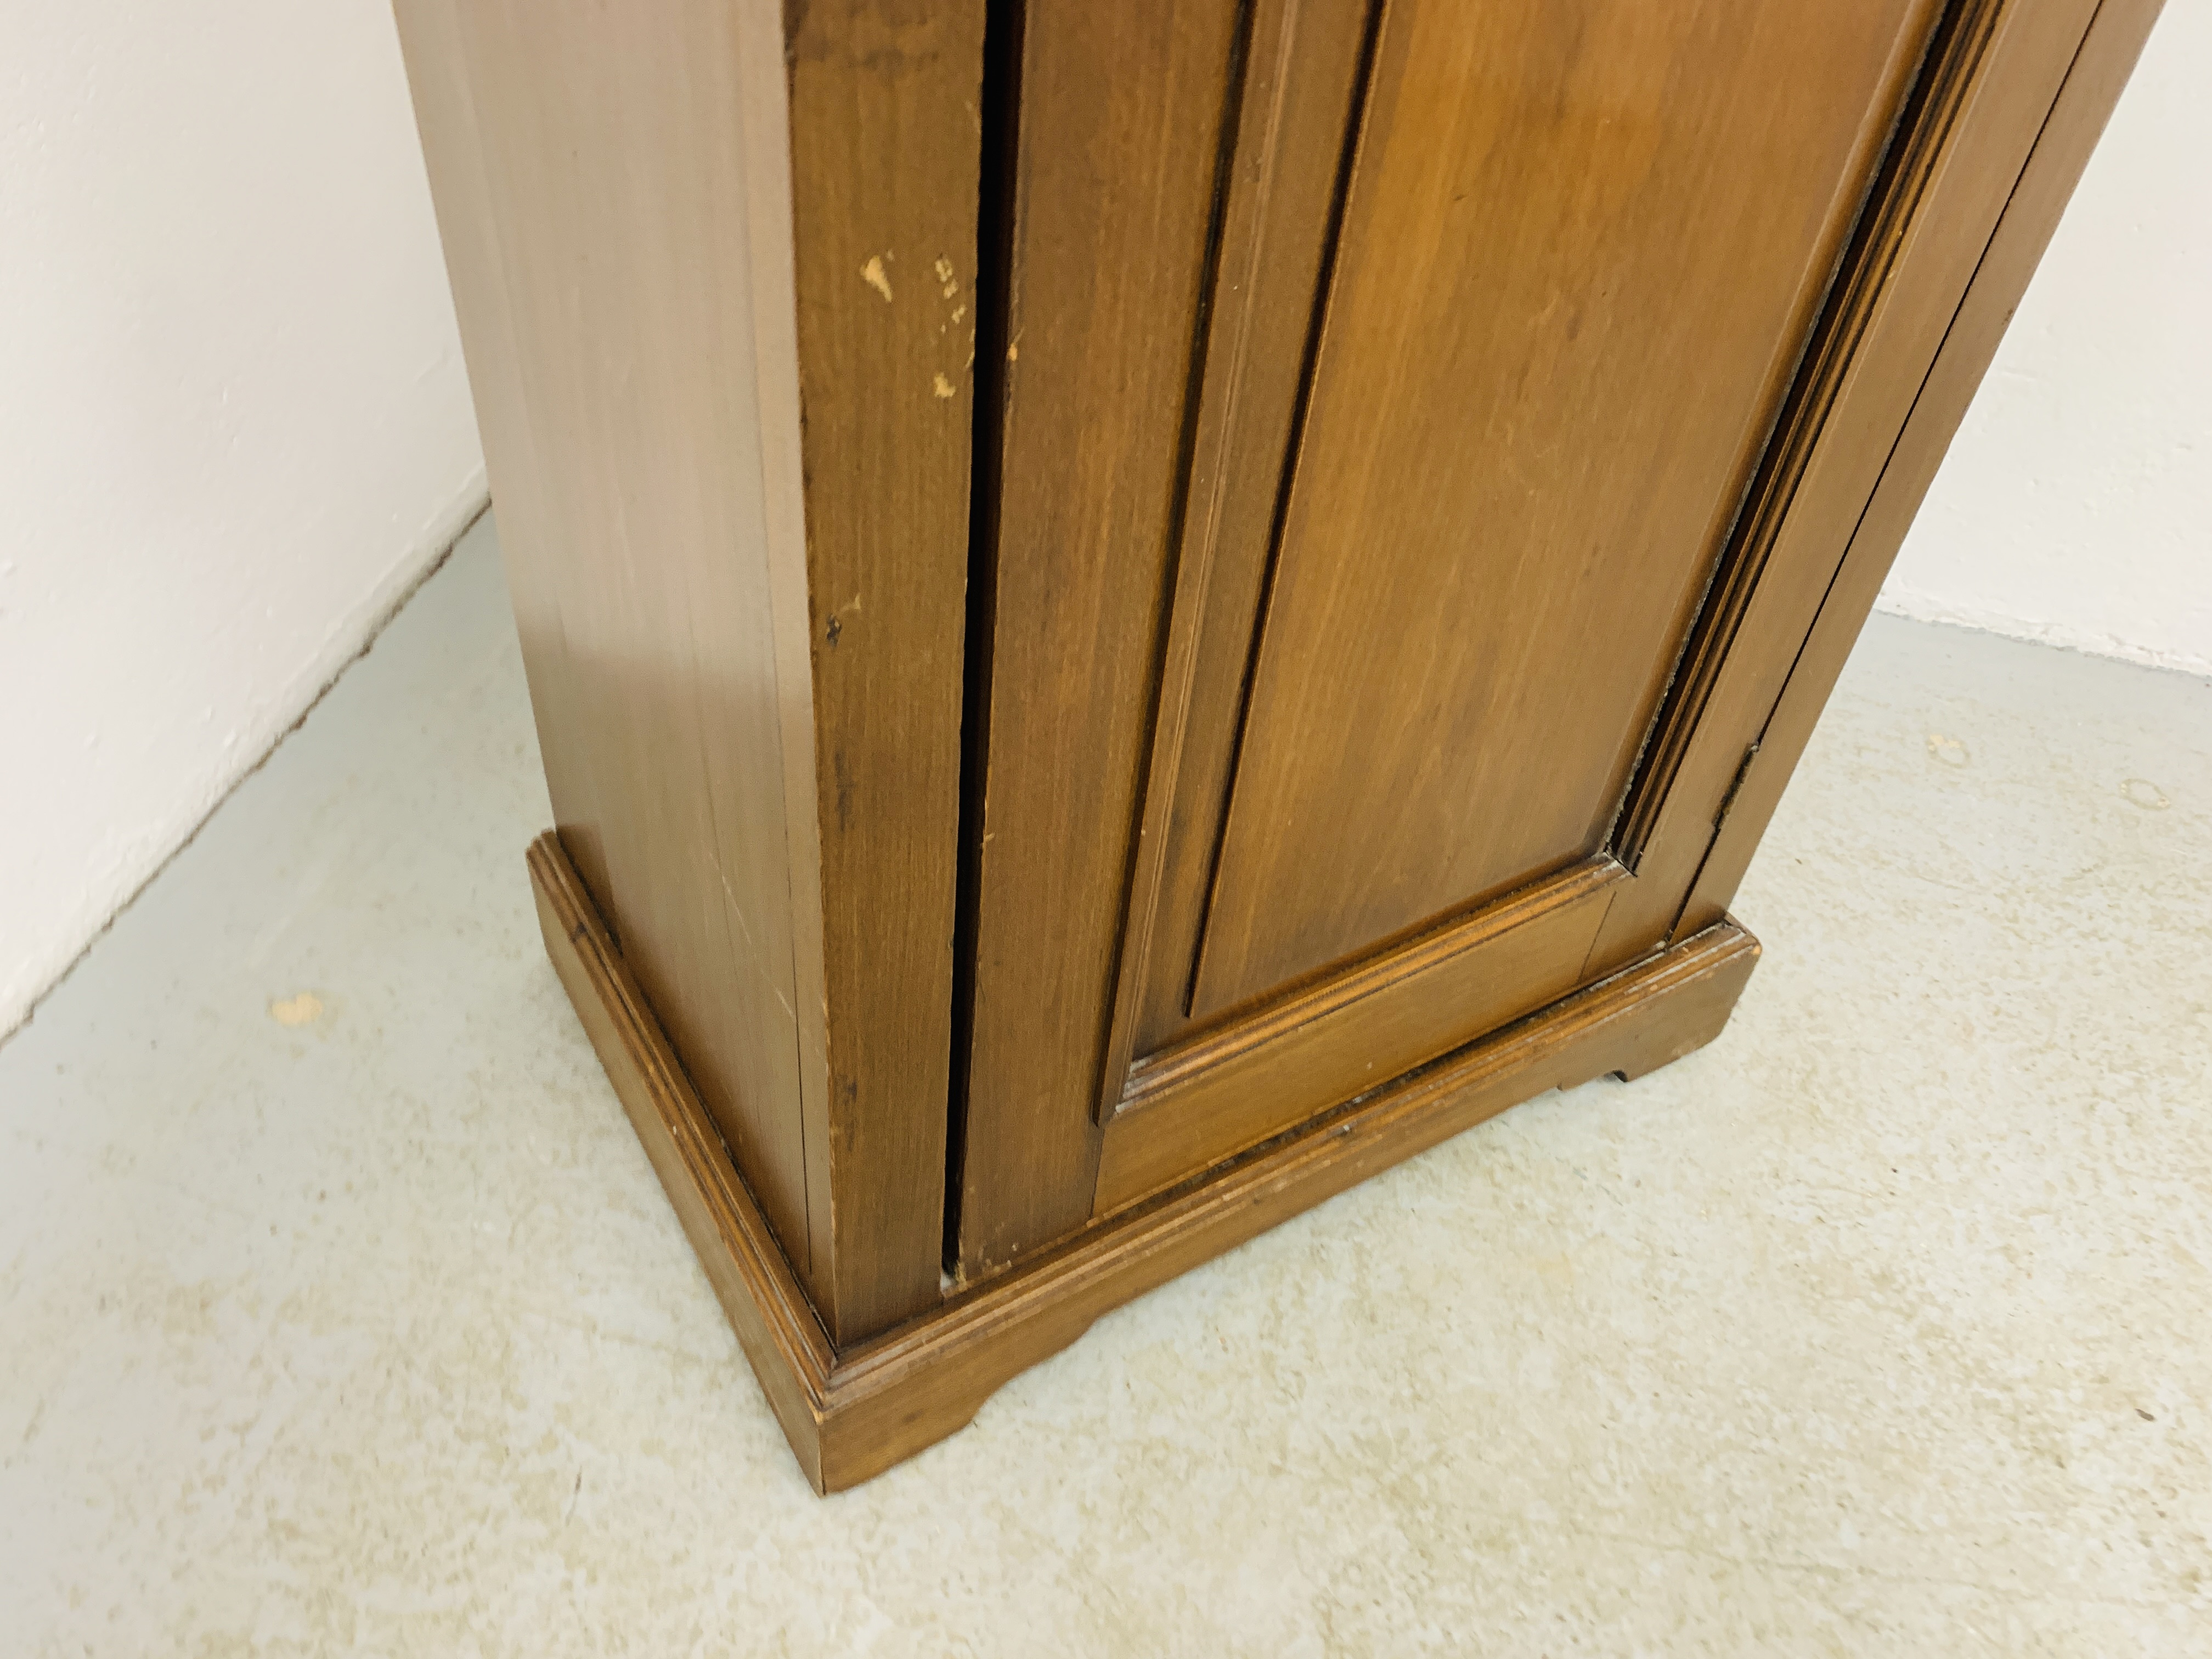 A HARDWOOD CABINET WITH PANEL DOOR AND SHELVED INTERIOR - W 50CM. D 35CM. H 100CM. - Image 6 of 7